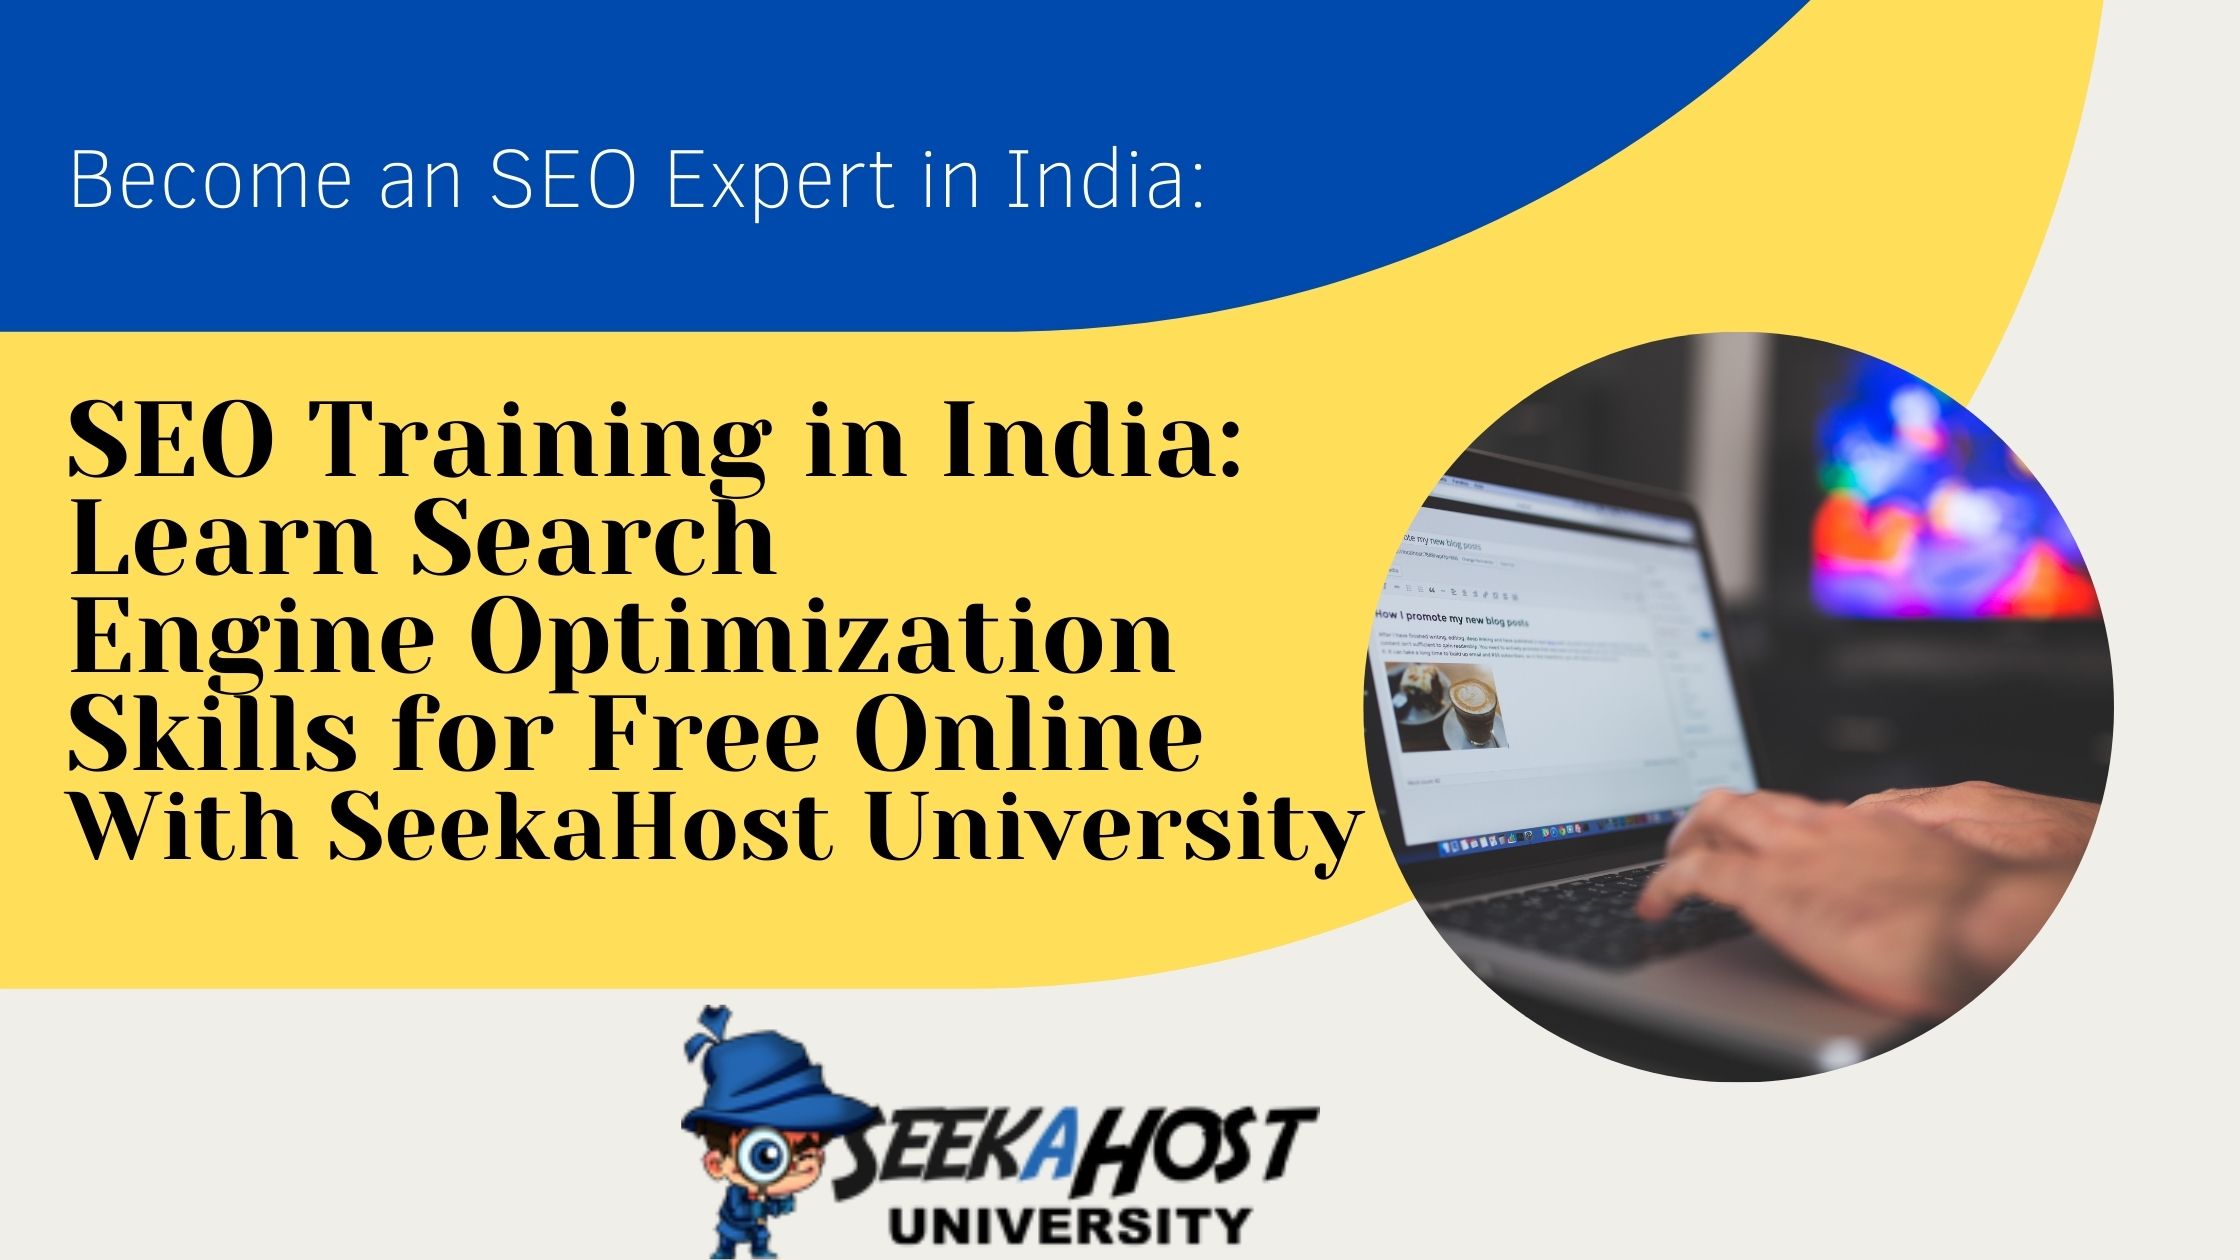 SEO Training in India for free